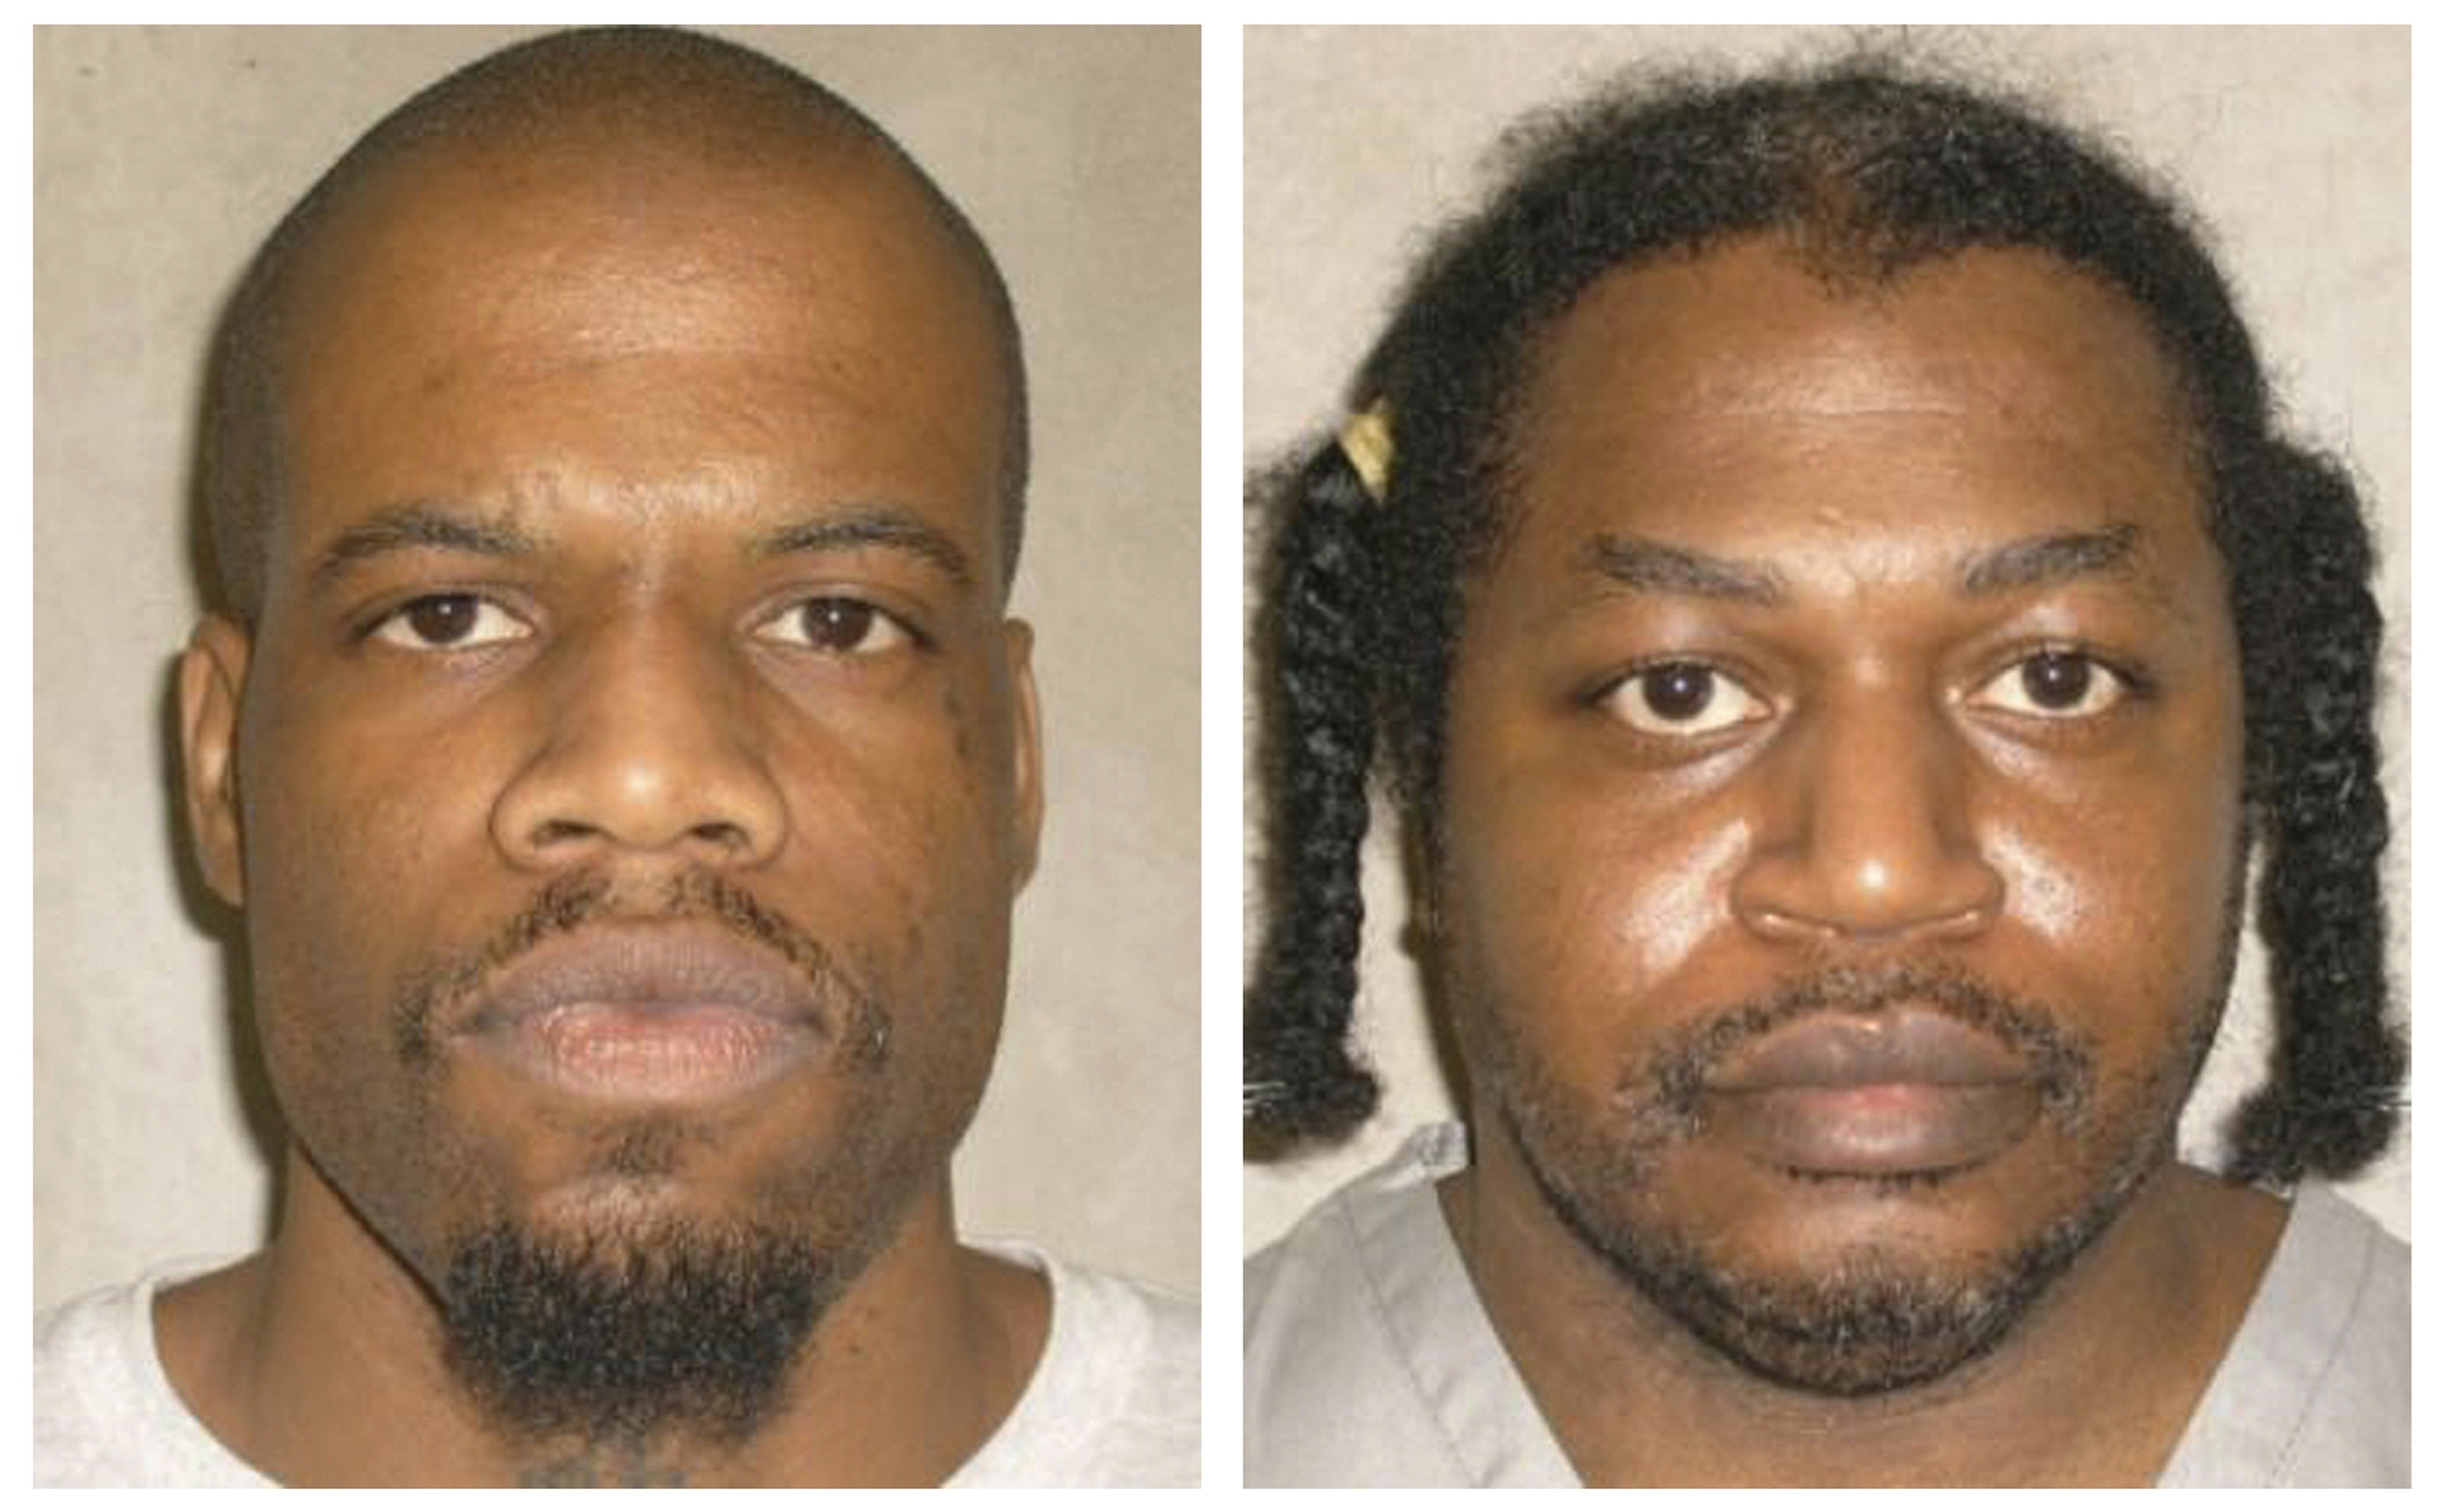 Death row inmates Charles Warner and Clayton Lockett seen in pictures from the Oklahoma Department of Corrections